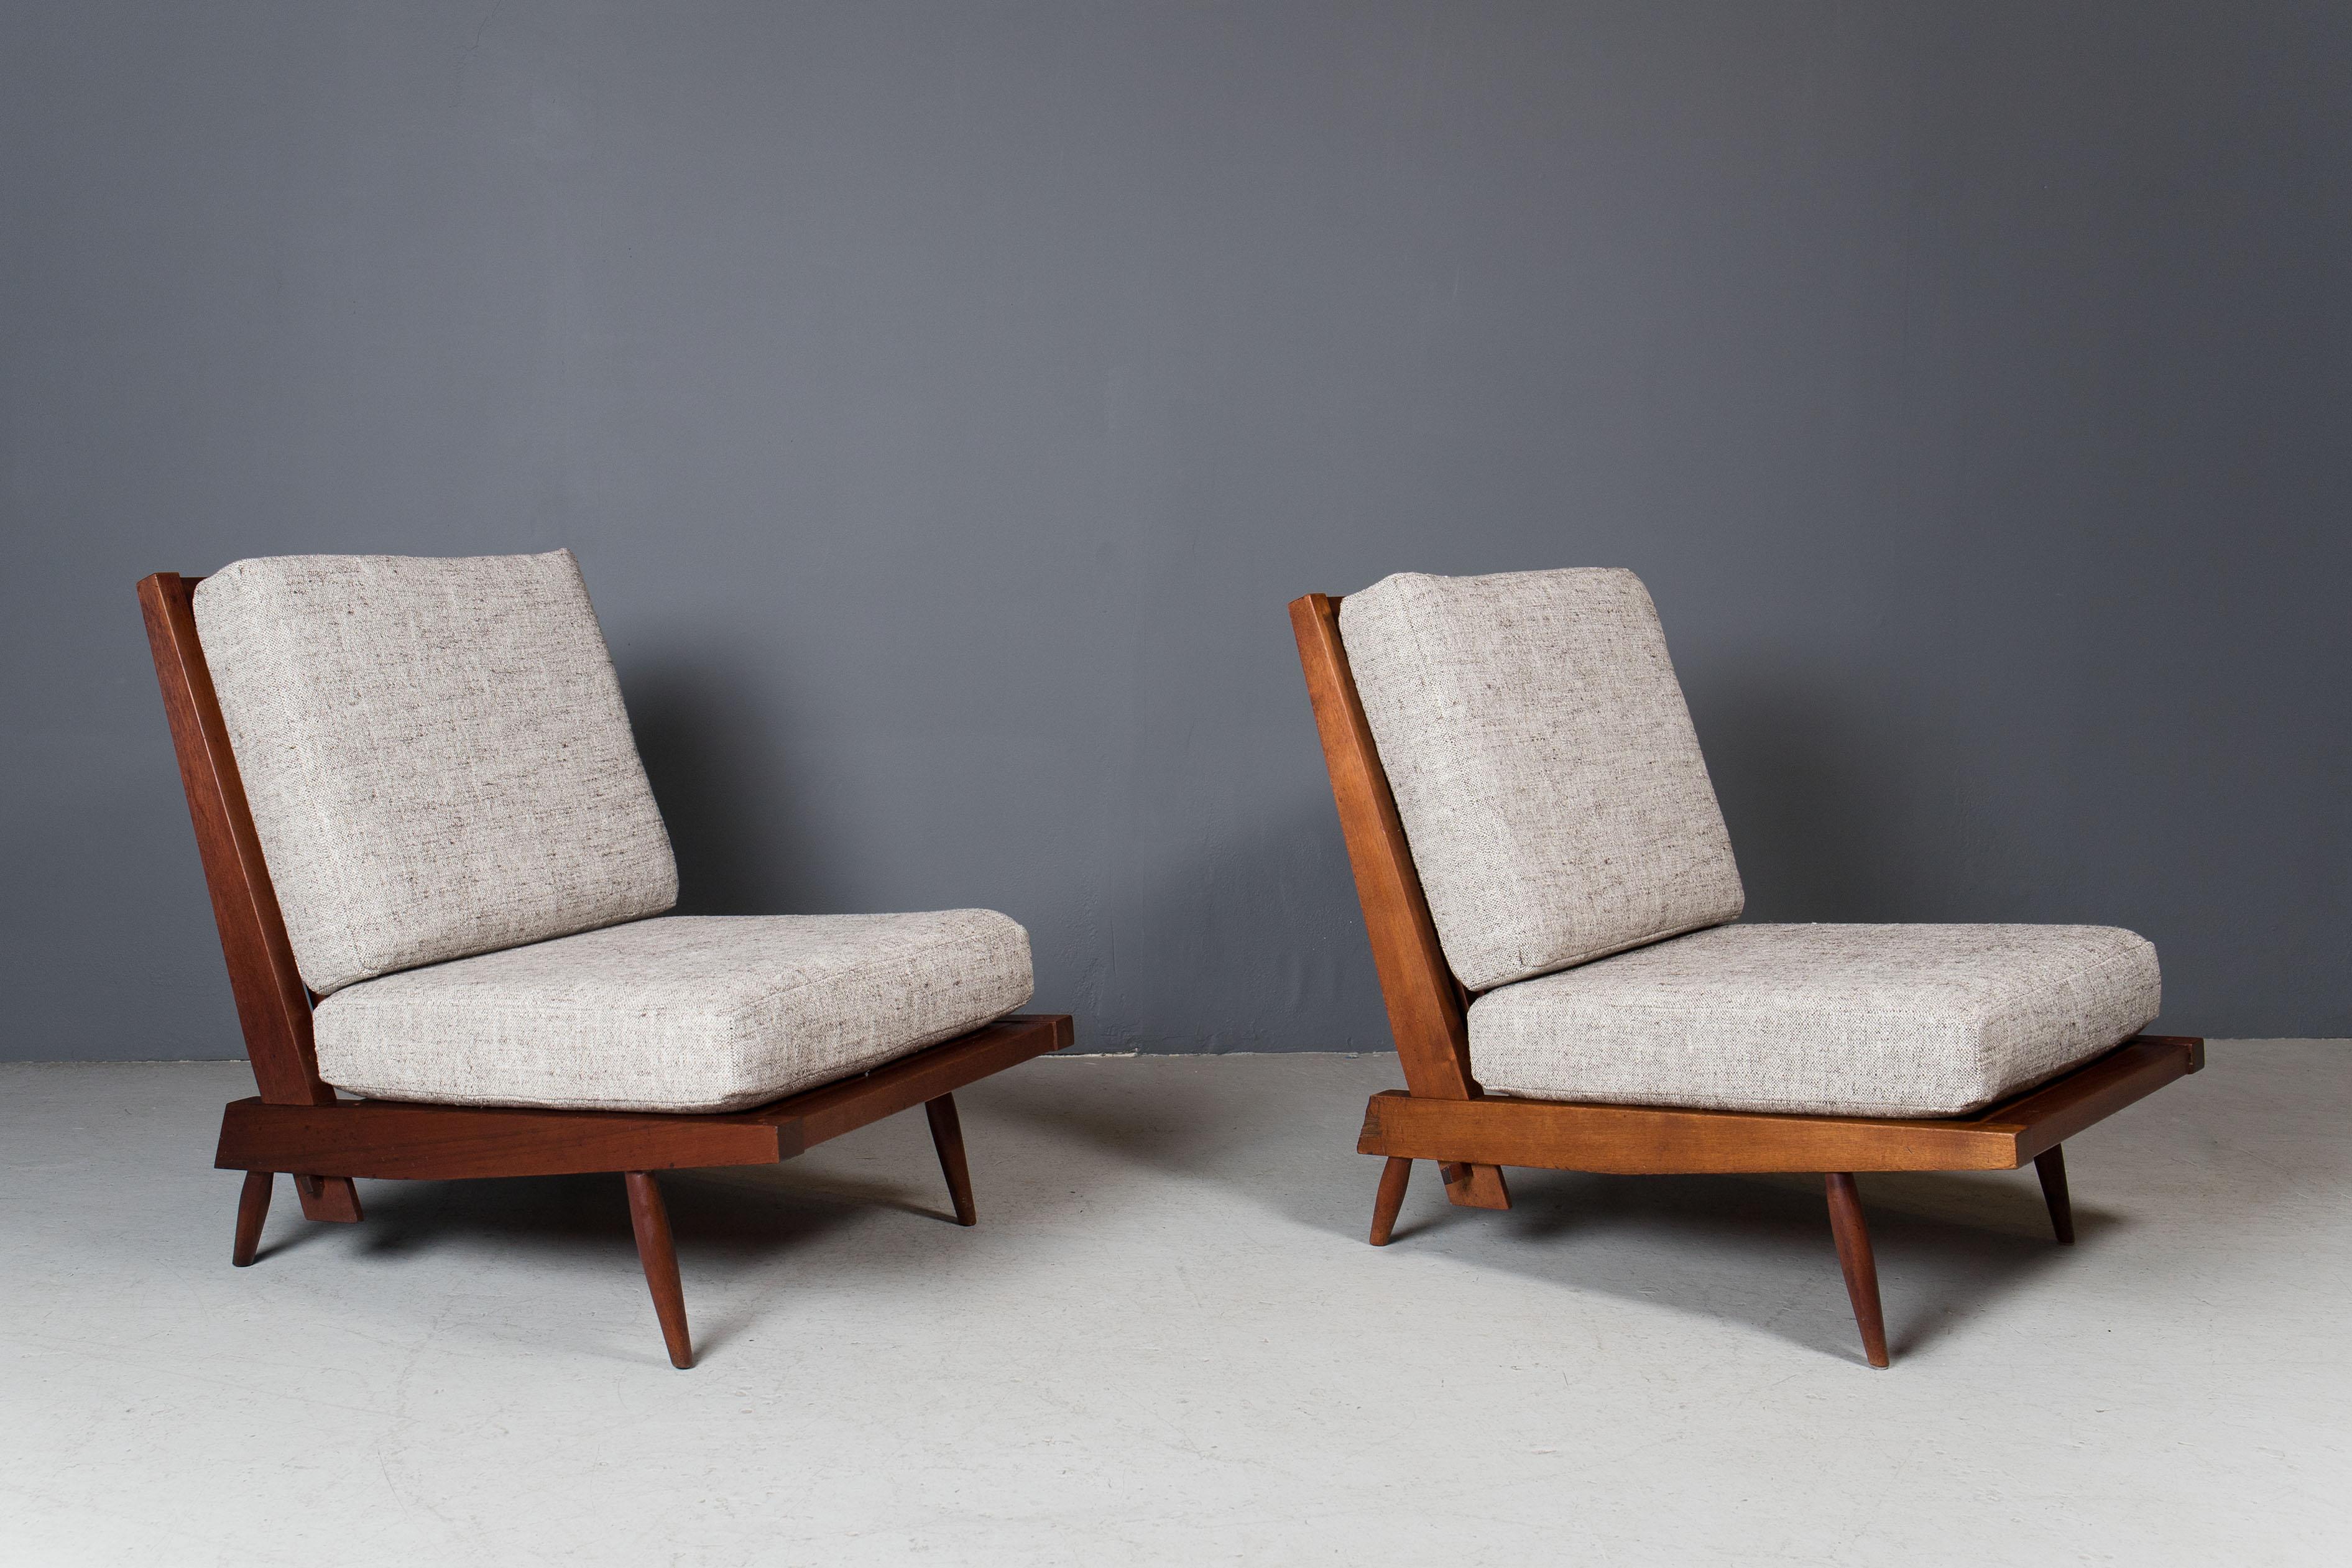 Pair of black walnut armless chairs by George Nakashima, ca 1960s.
Walnut frames have been cleaned and conditioned with oil, cushions are newly made.
Beautiful patina throughout.

  